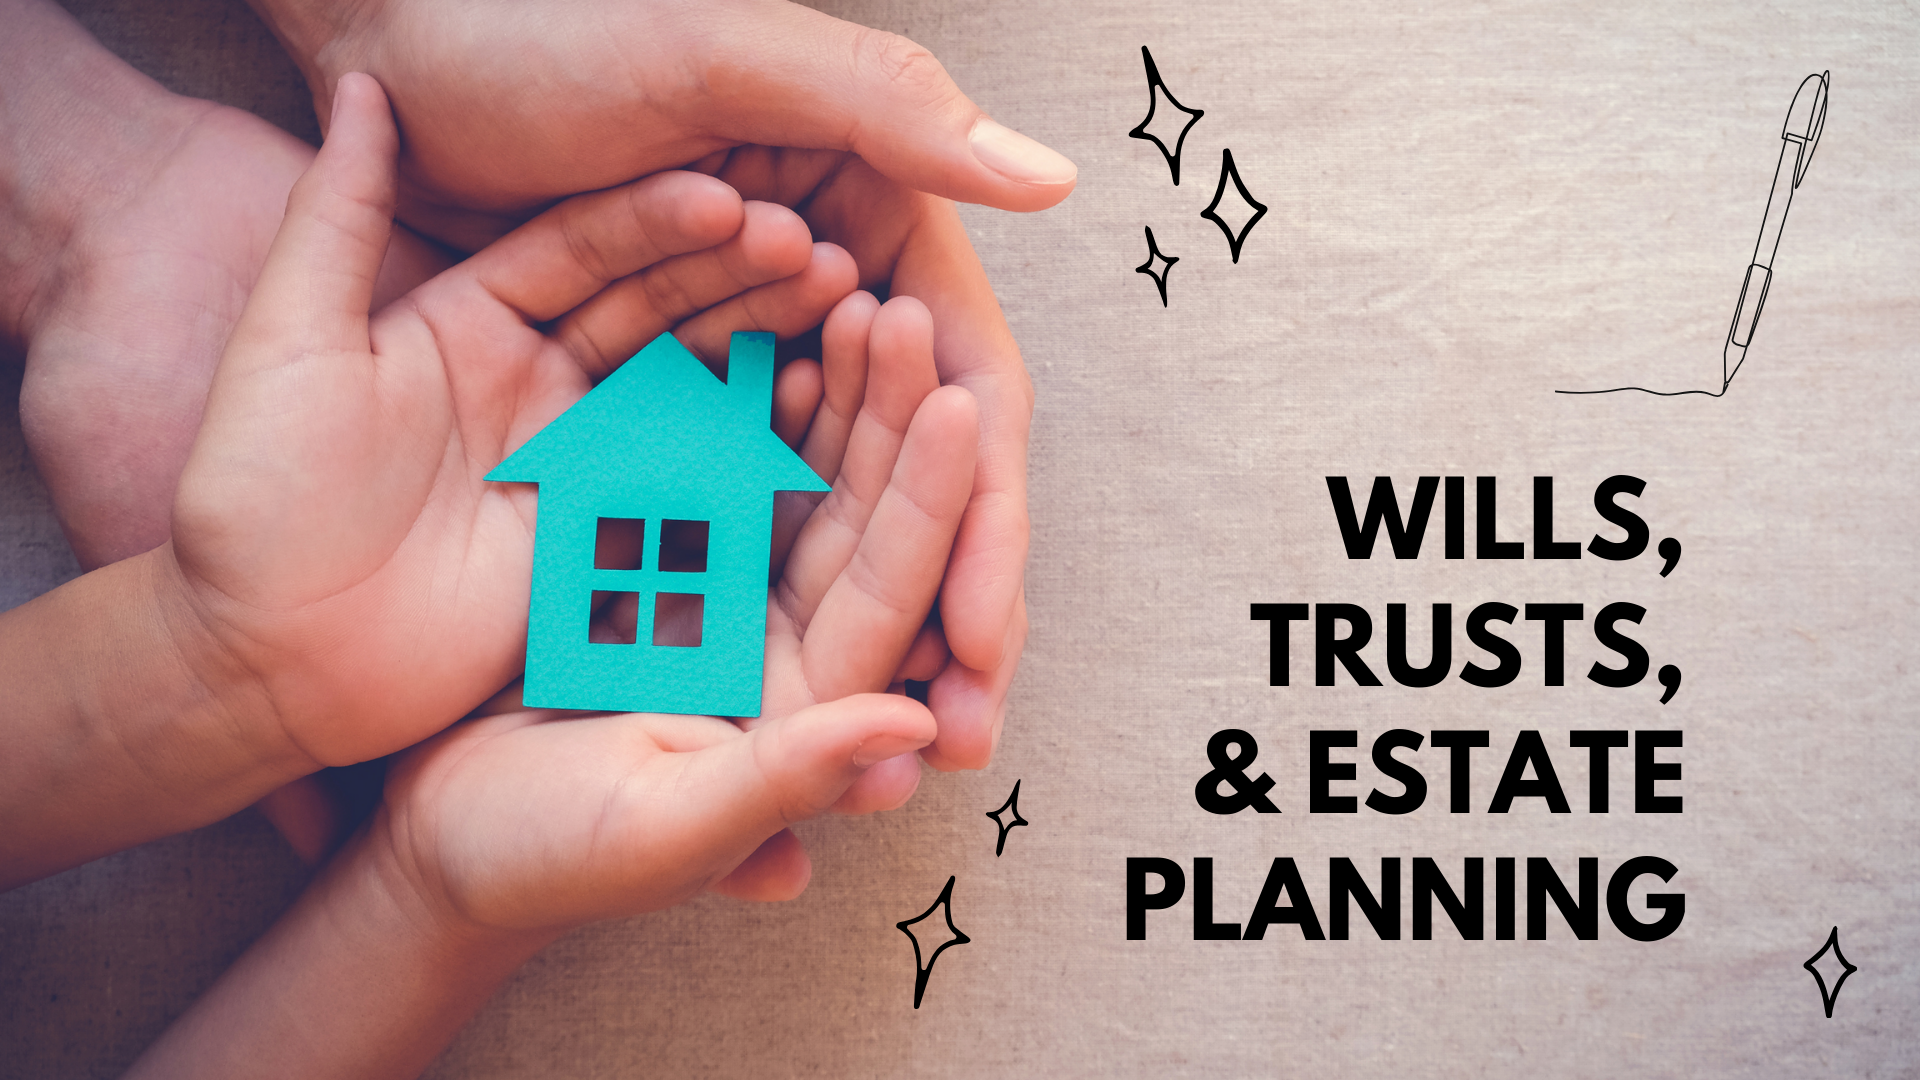 Two sets of hands holding a paper model of a house on the left. The text reads Wills, Trusts, and Estate Planning on the left.